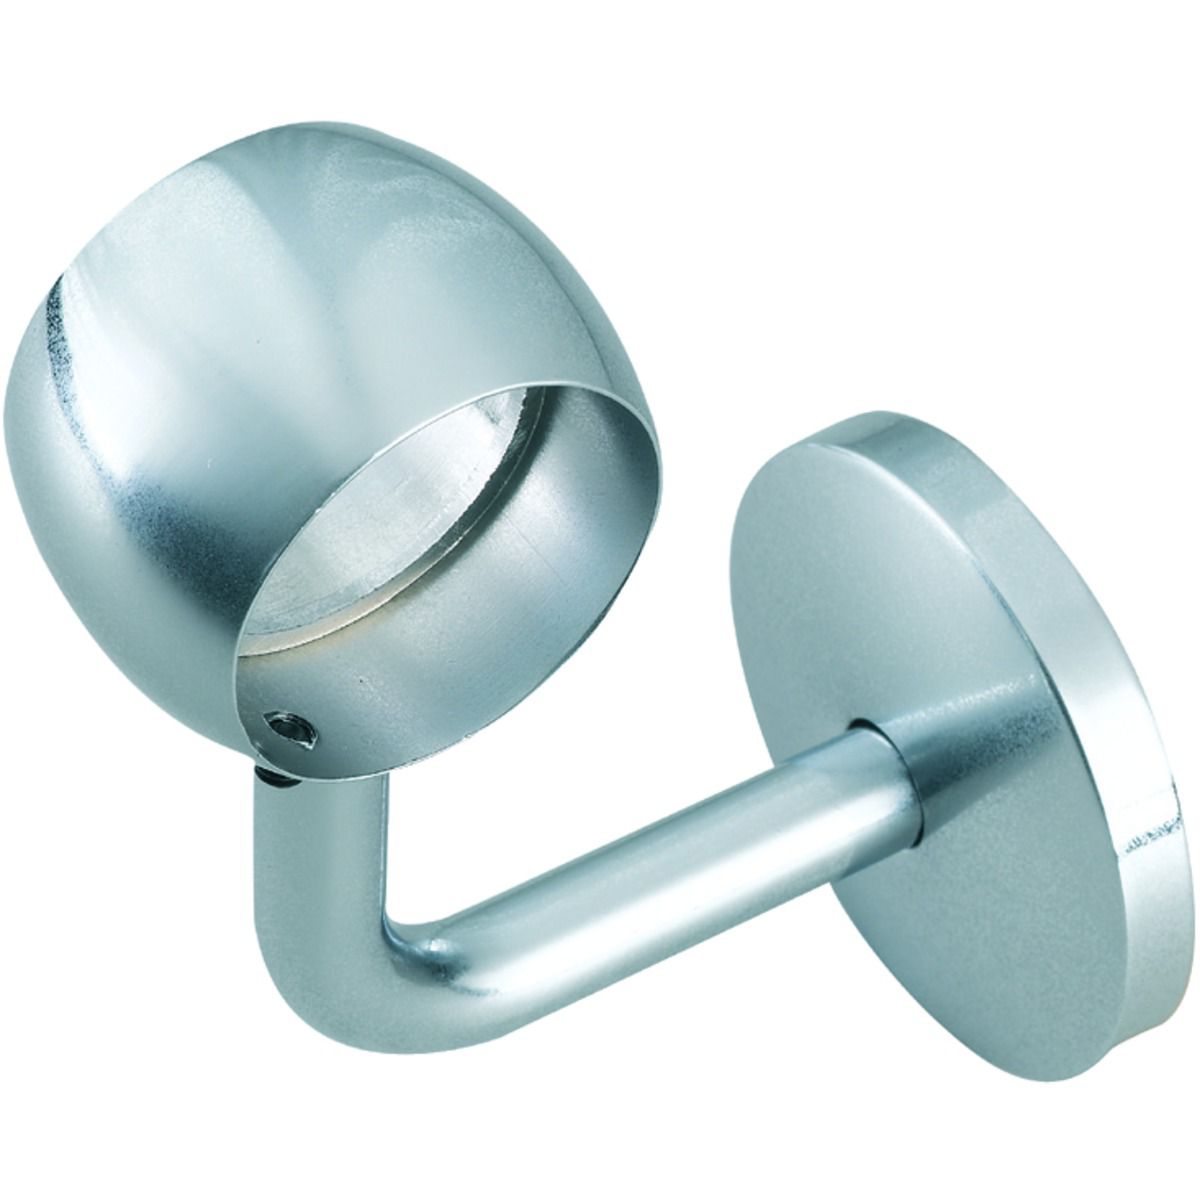 Image of Rothley Handrail Connecting Wall Bracket - Chrome